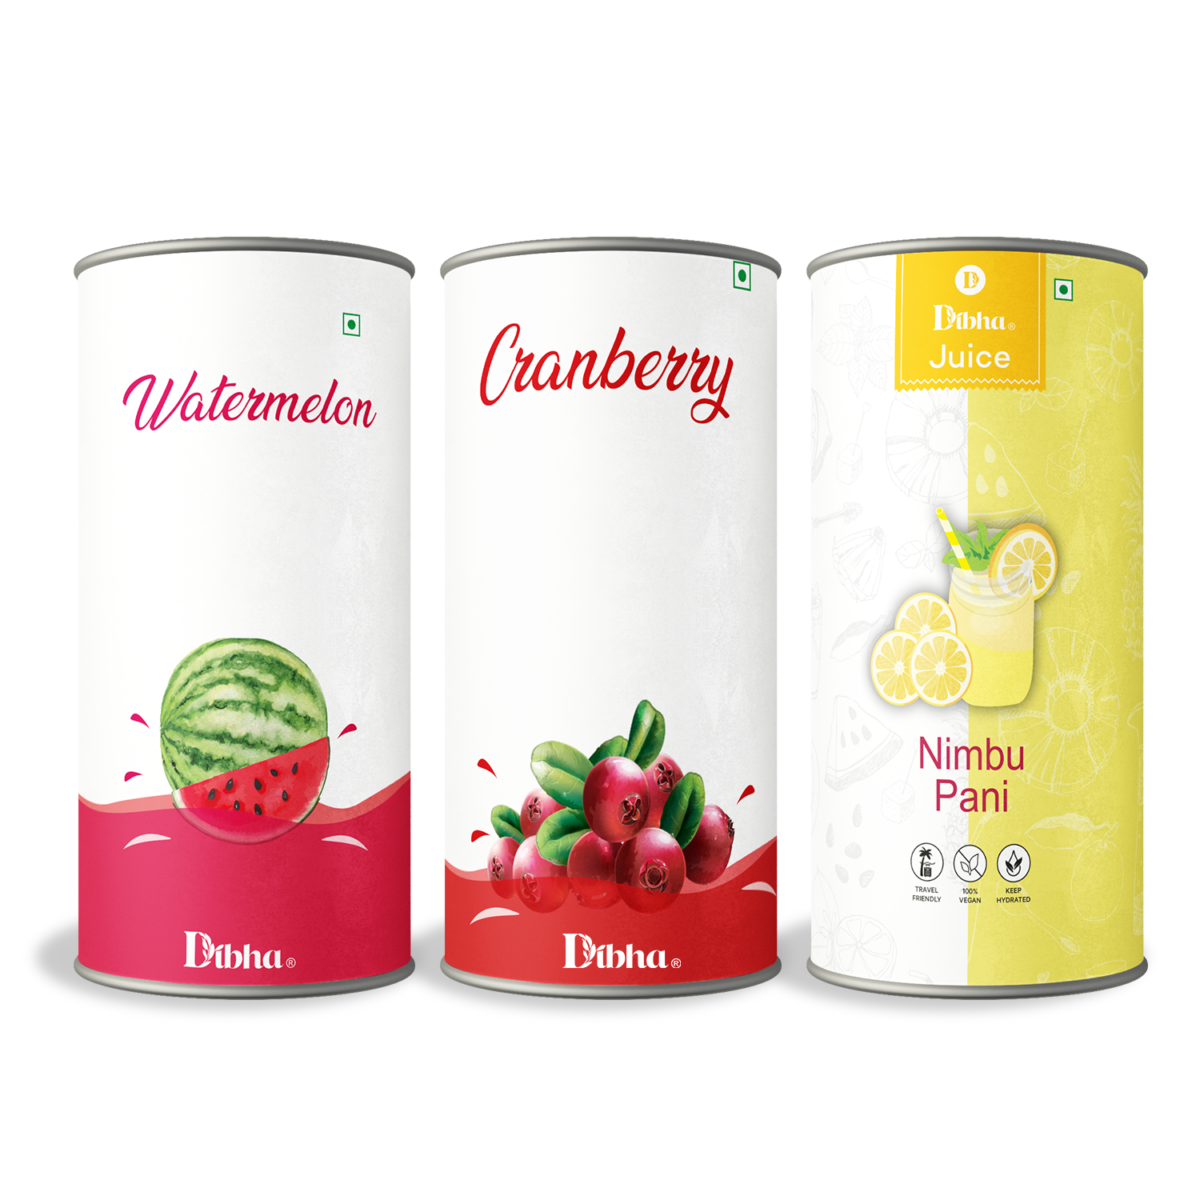 Honest Snacking Instant Juices Drink Premix Cups (Pack Of 3) Instant Cranberry, Watermelon & Nimbu Pani 7 Cups Each Cup 20 gm front-dibha